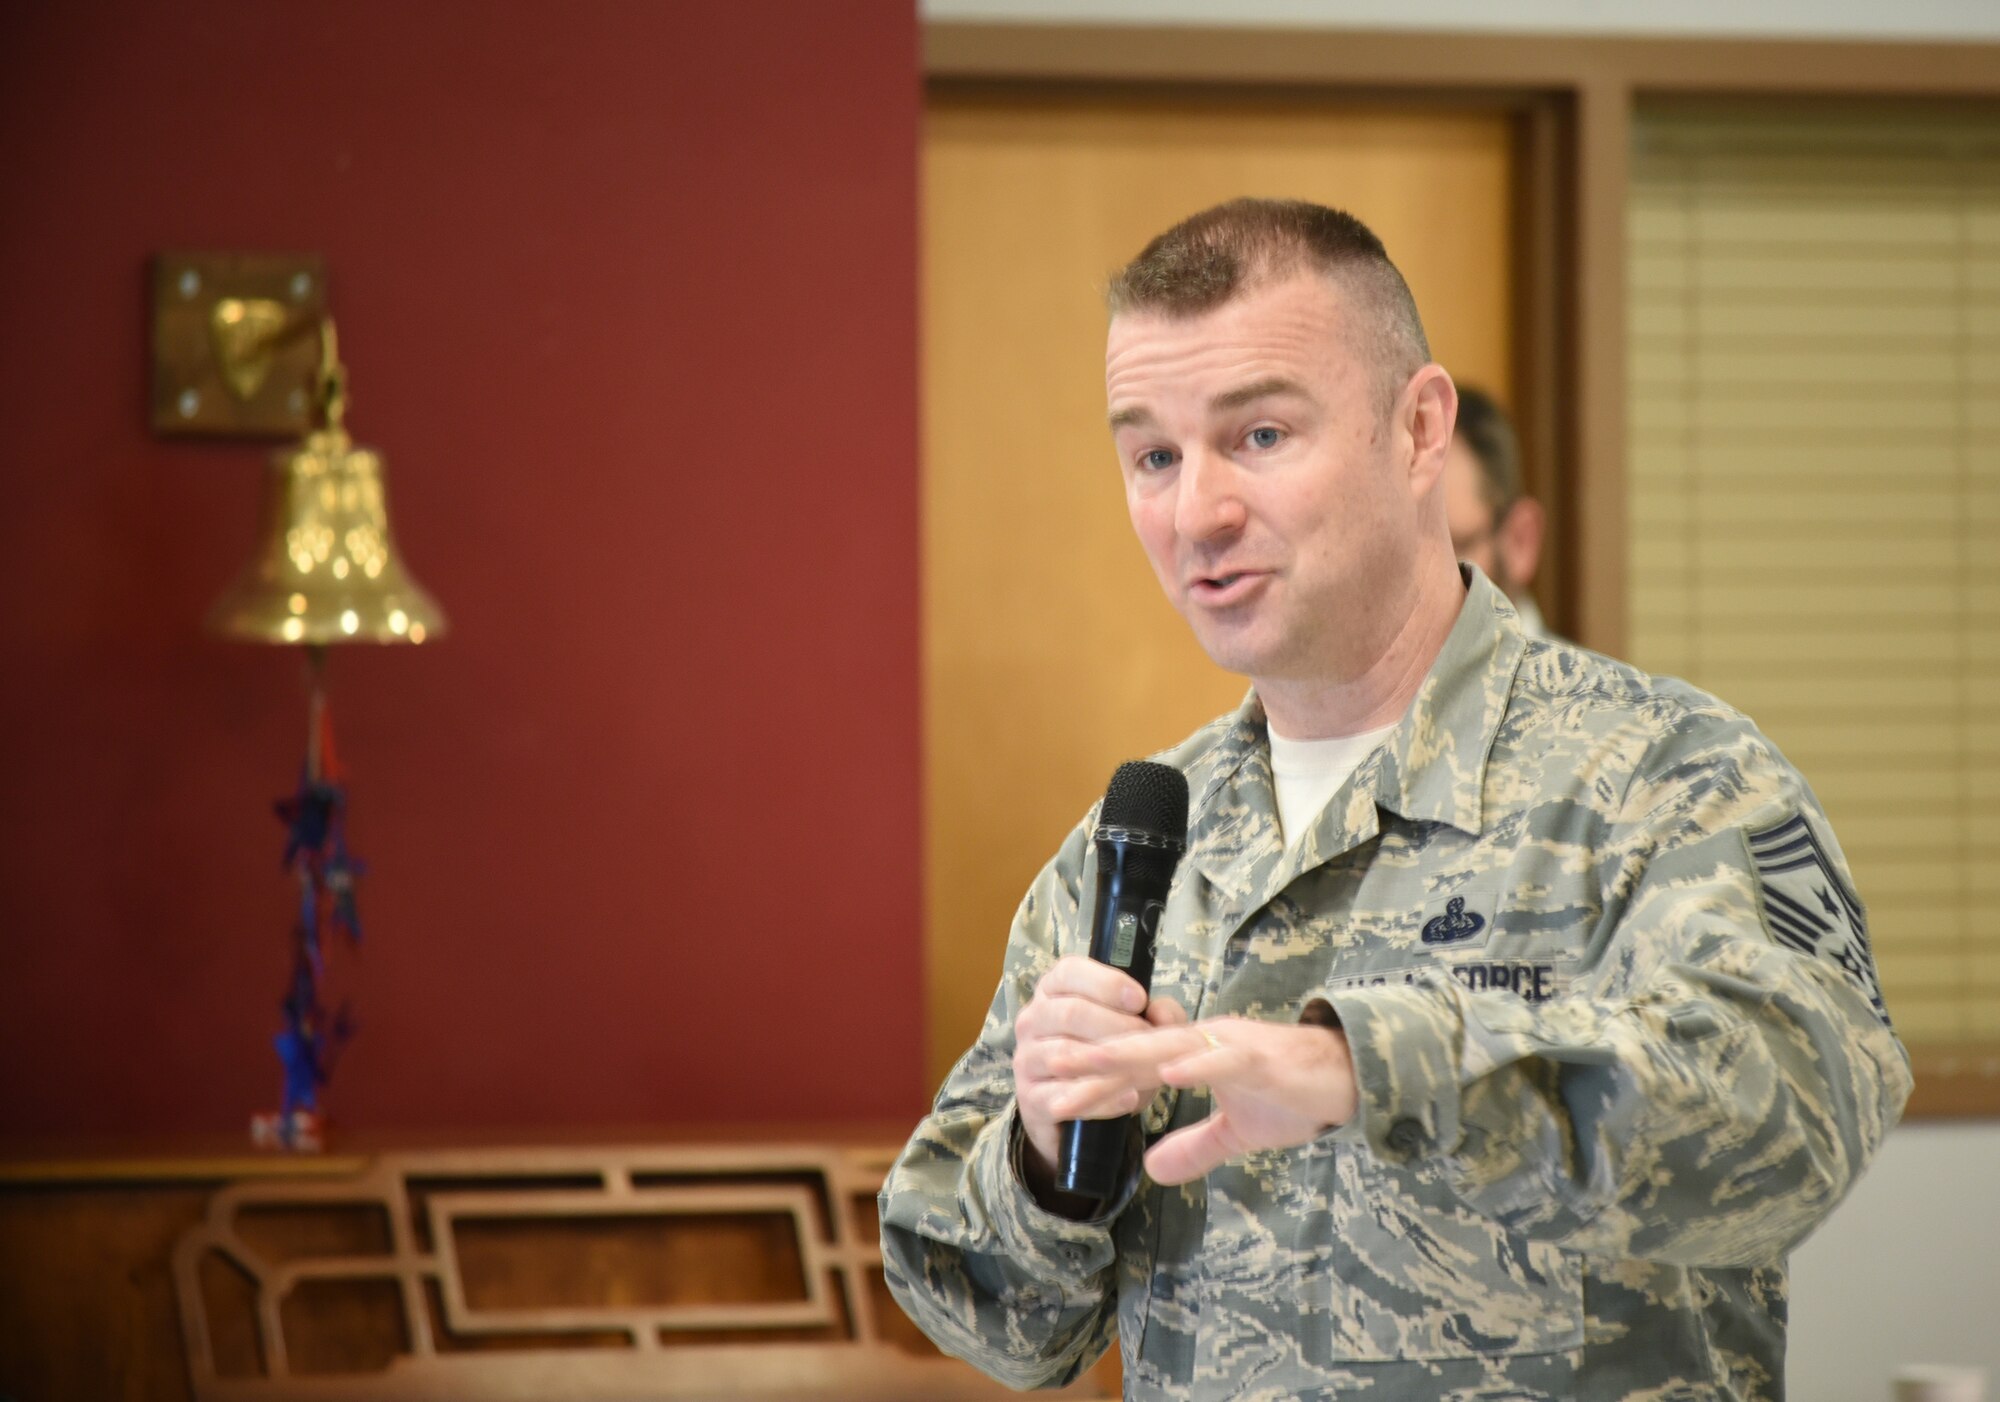 Chief Master Sgt. Gary Sharp, Air Force Sustainment Center command chief, poses a question to the Norman Veterans Center military panel during a Feb. 28, 2018, visit to the center in Norman, Oklahoma. The 15-member panel frequently visits area schools to share their military experiences and life lessons with students.